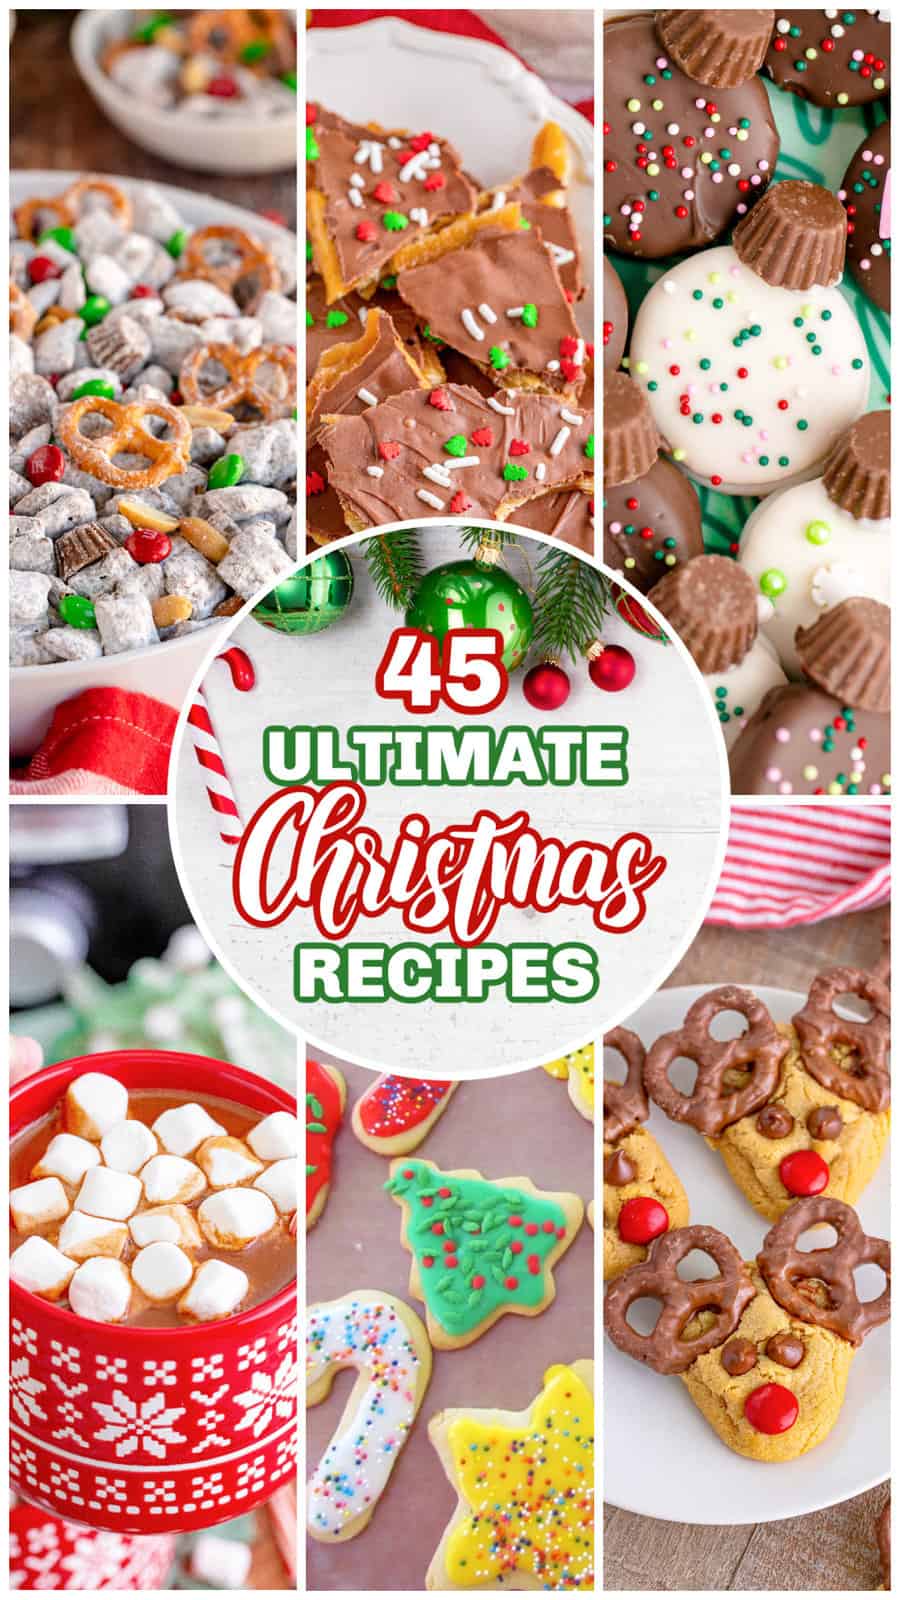 a collage of 6 photos of Christmas Recipes with text in the middle that says "45 Ultimate Christmas Recipes". 